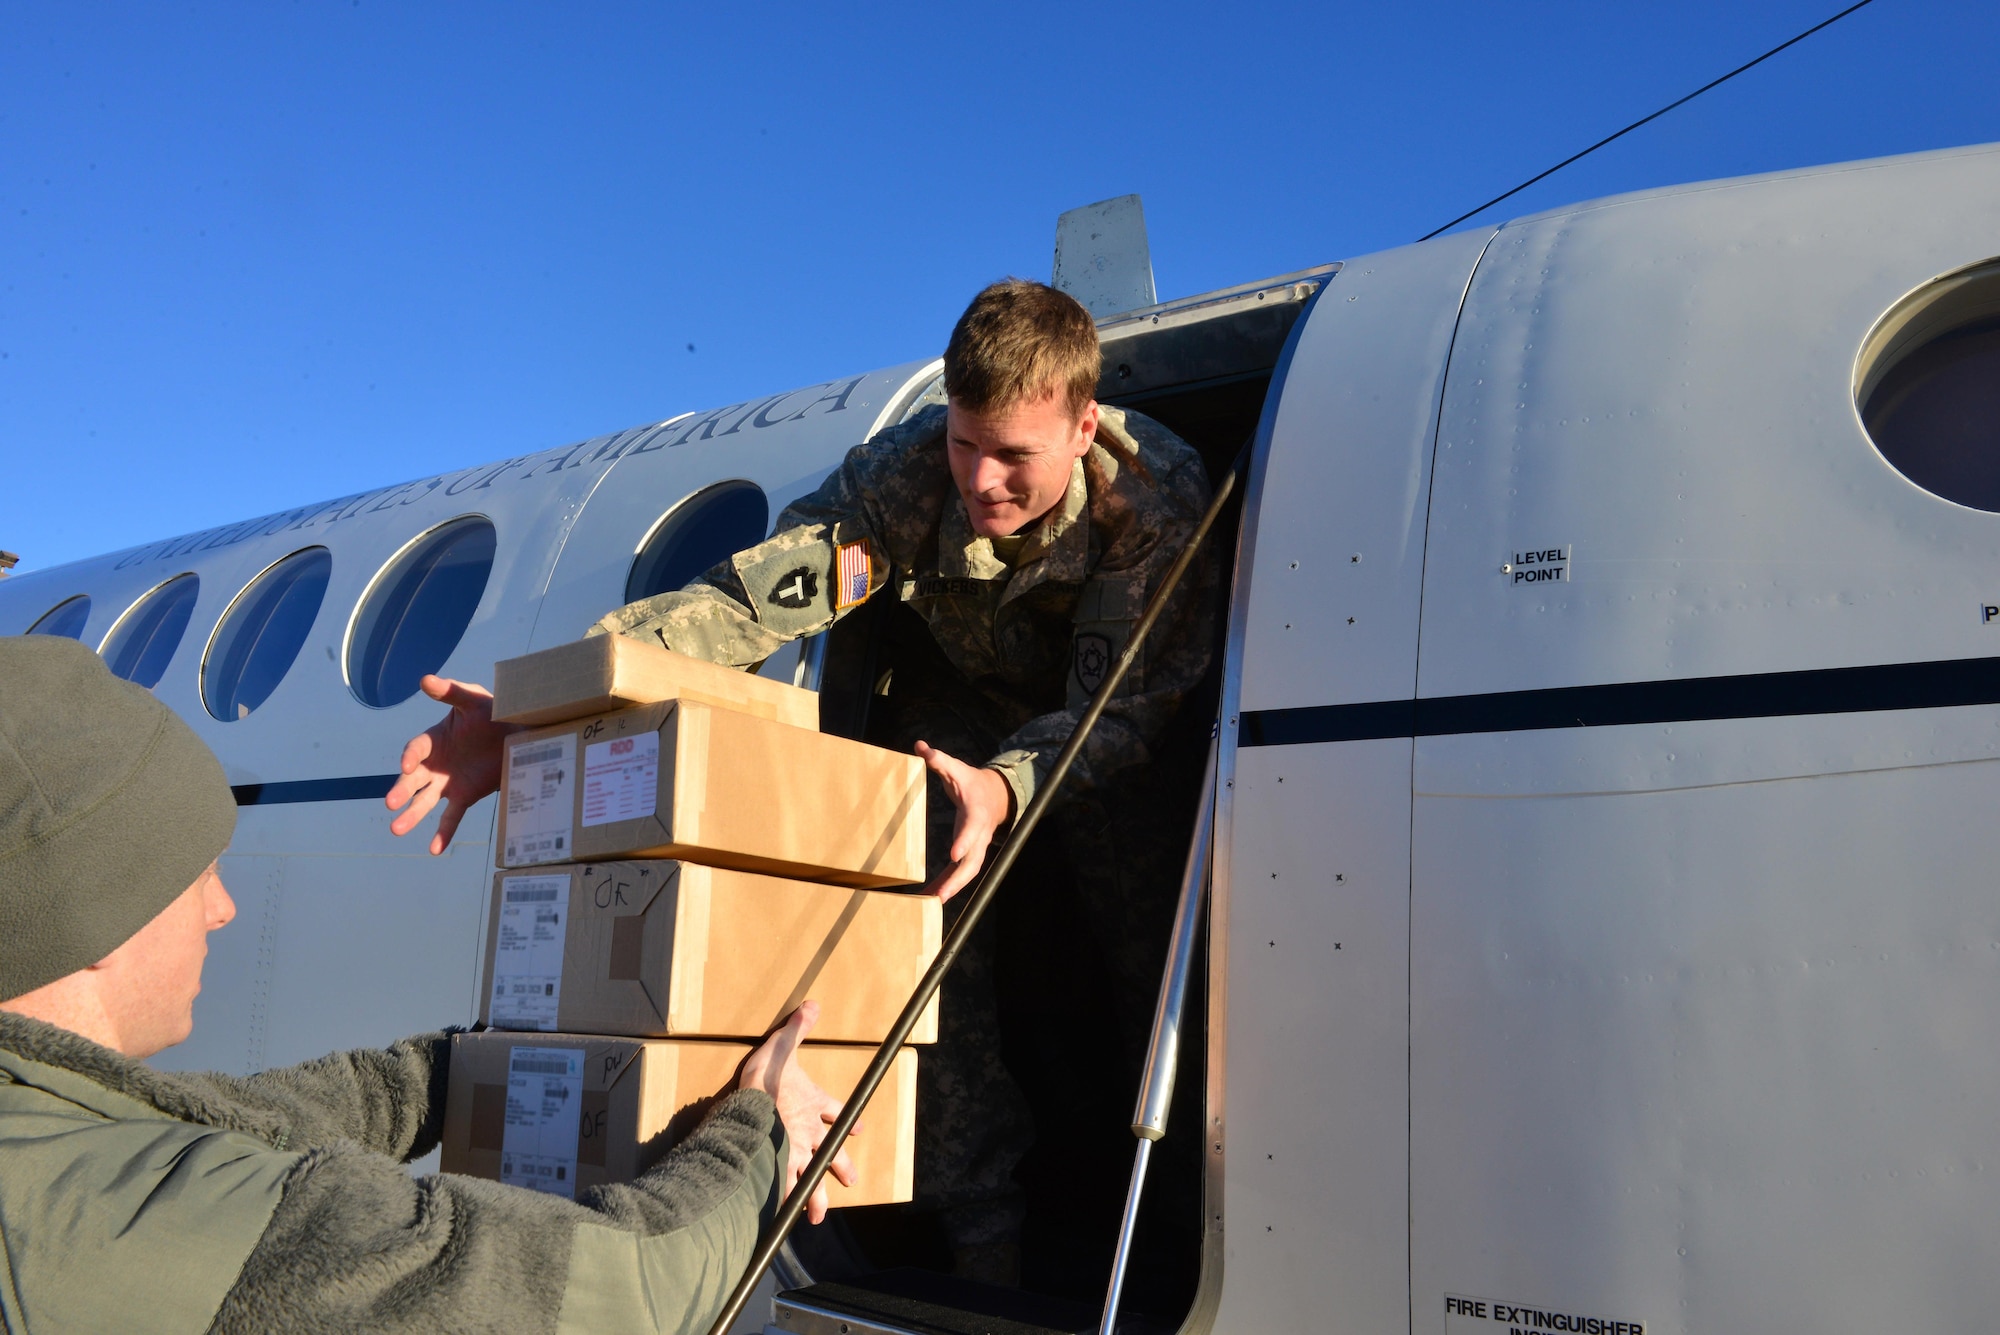 Chief Warrant Officer Richard Vickers, a pilot, helps load packages containing sensitive equipment on the Offutt flight line at Offutt Air Force Base, Neb., Nov. 16, 2016. Defense couriers move sensitive and top secret material globally for the Department of Defense and other government agencies. (U.S. Air Force photo/Senior Airman Rachel Hammes)